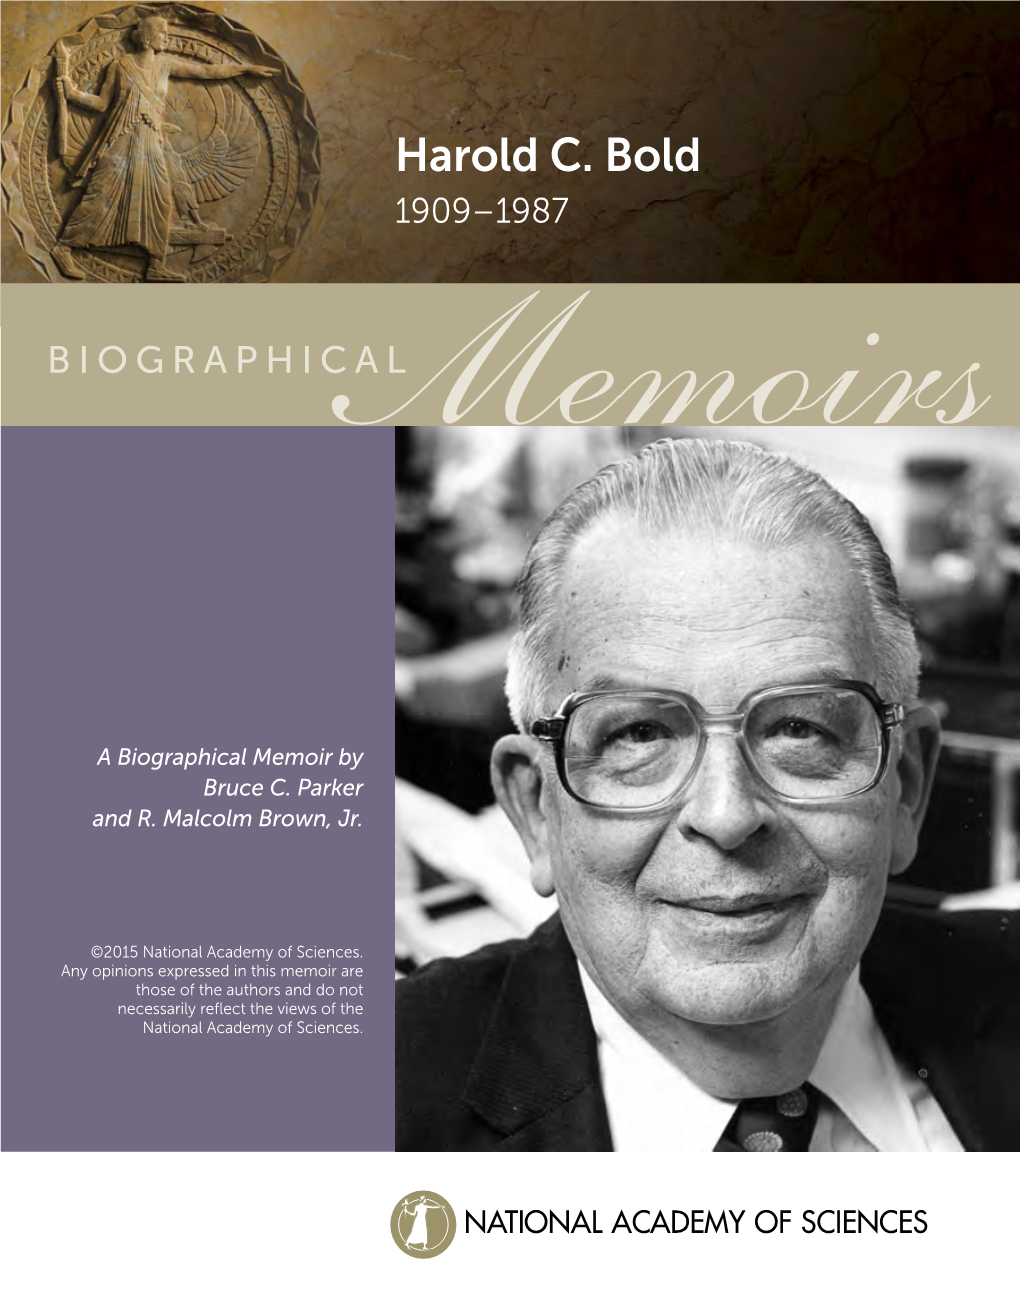 Harold Bold Was Born at Home in the Bronx, the Borough of Manhattan, New York City, on June 16, 1909